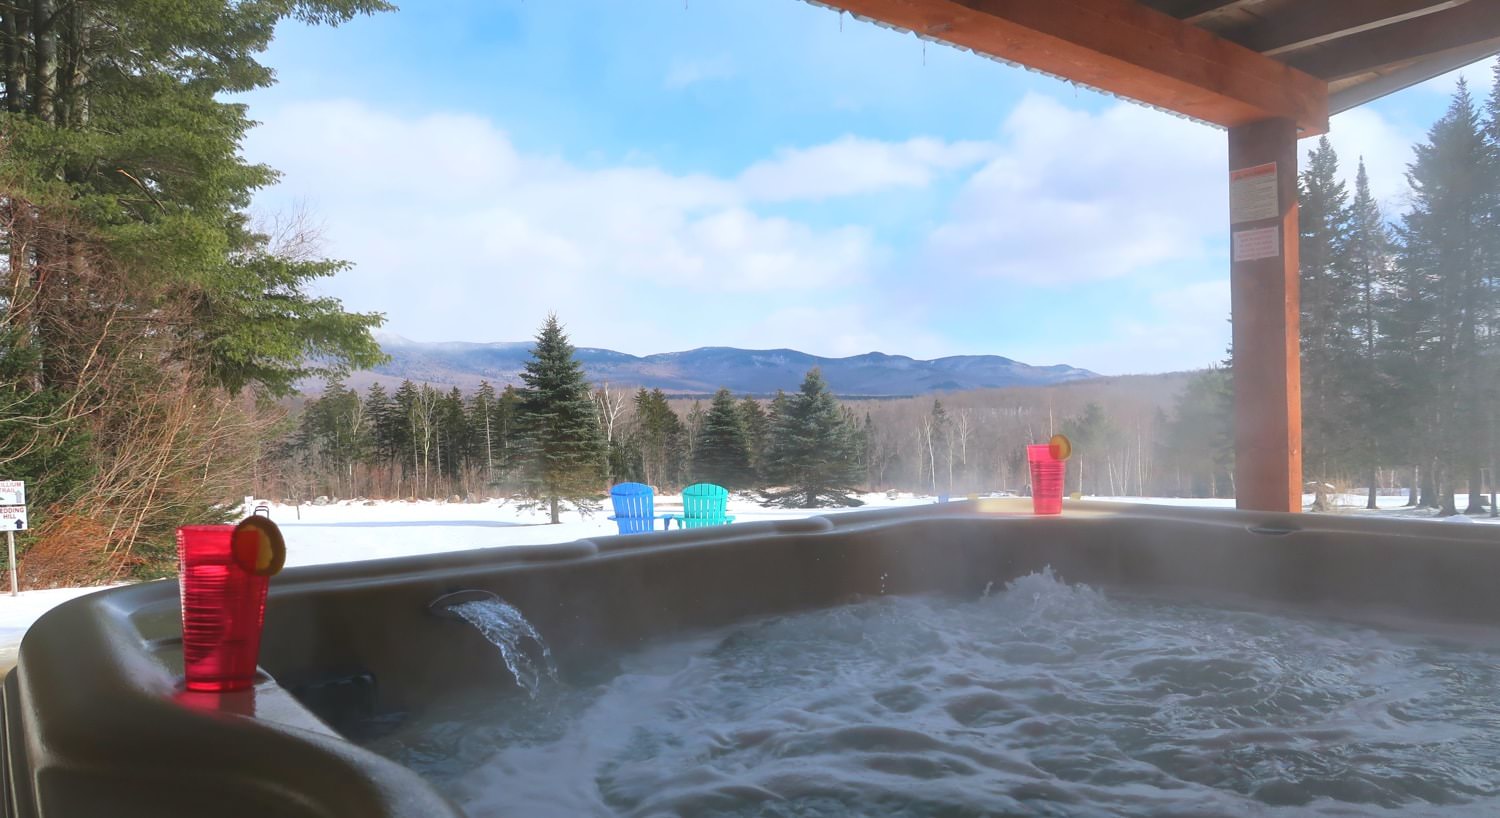 View from bubbling hot tub of snow-covered ground and trees and hills in the background